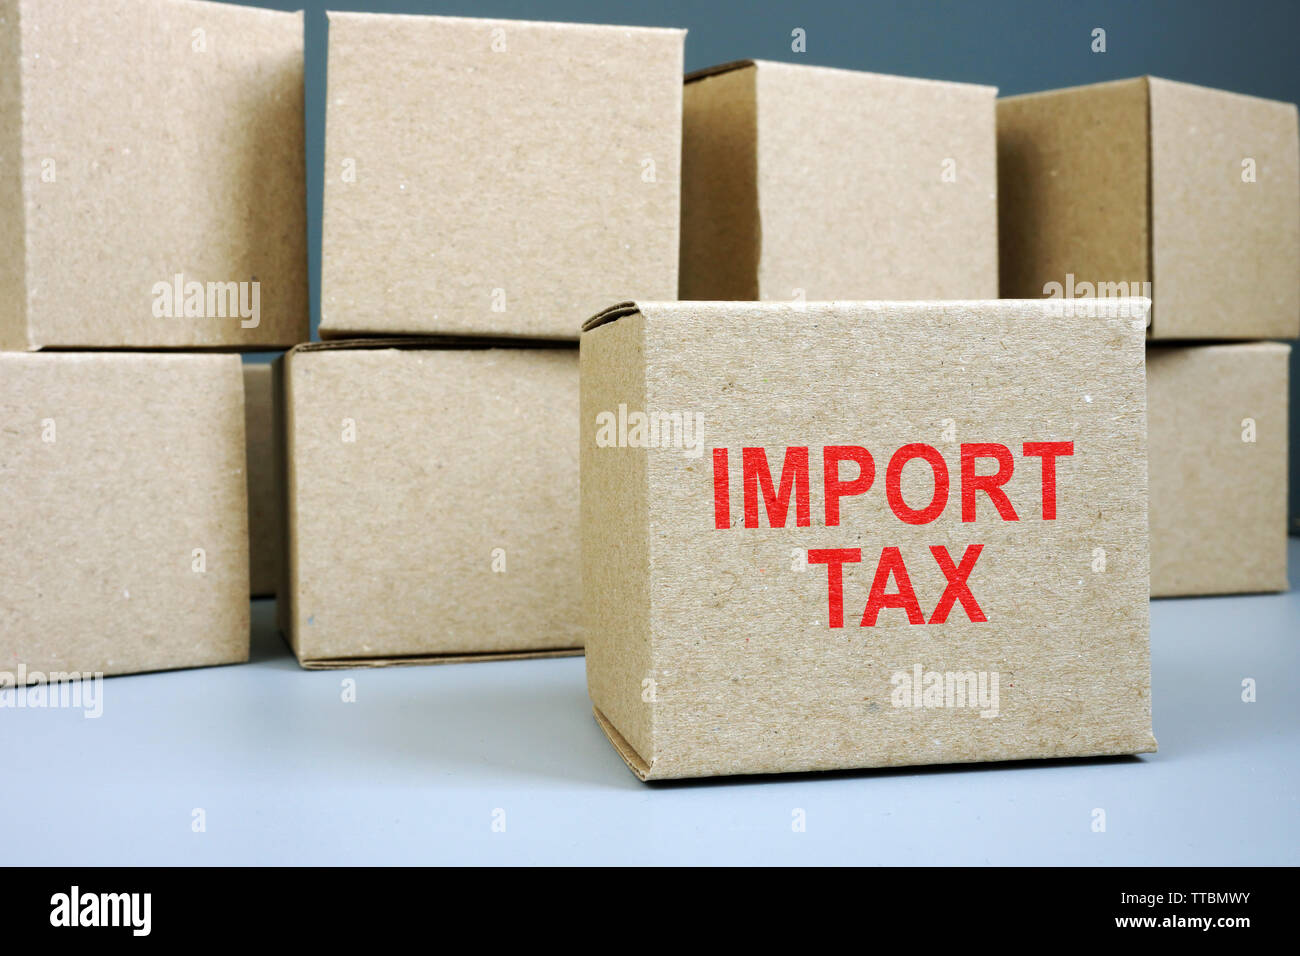 Import tax red stamp on cardboard box. Stock Photo